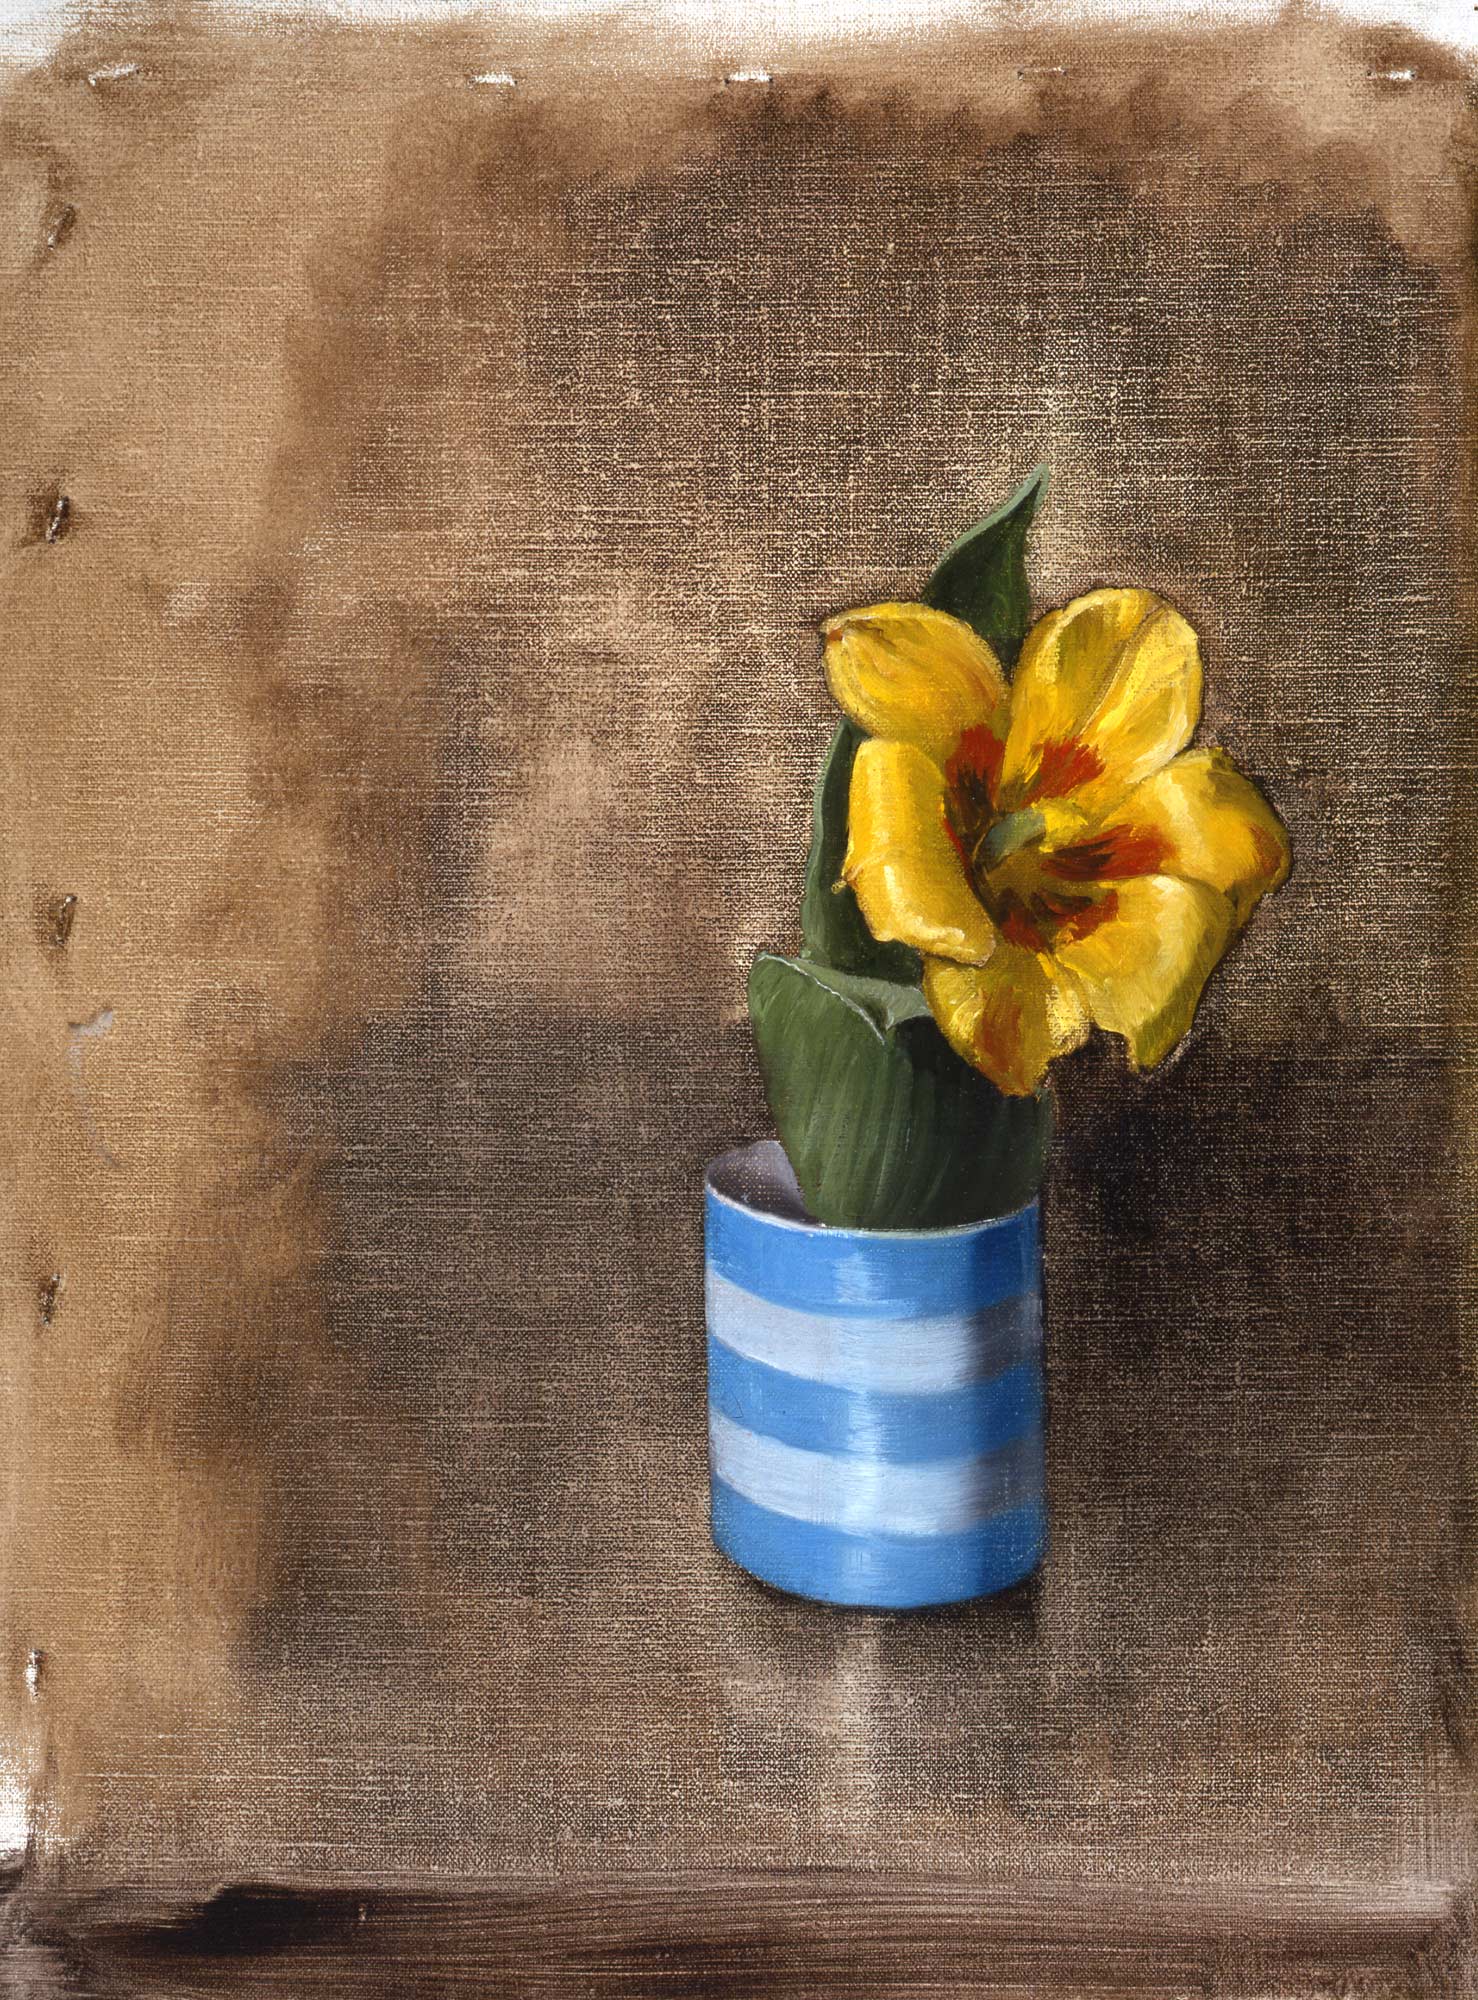 Study of a Tulip in a Cup